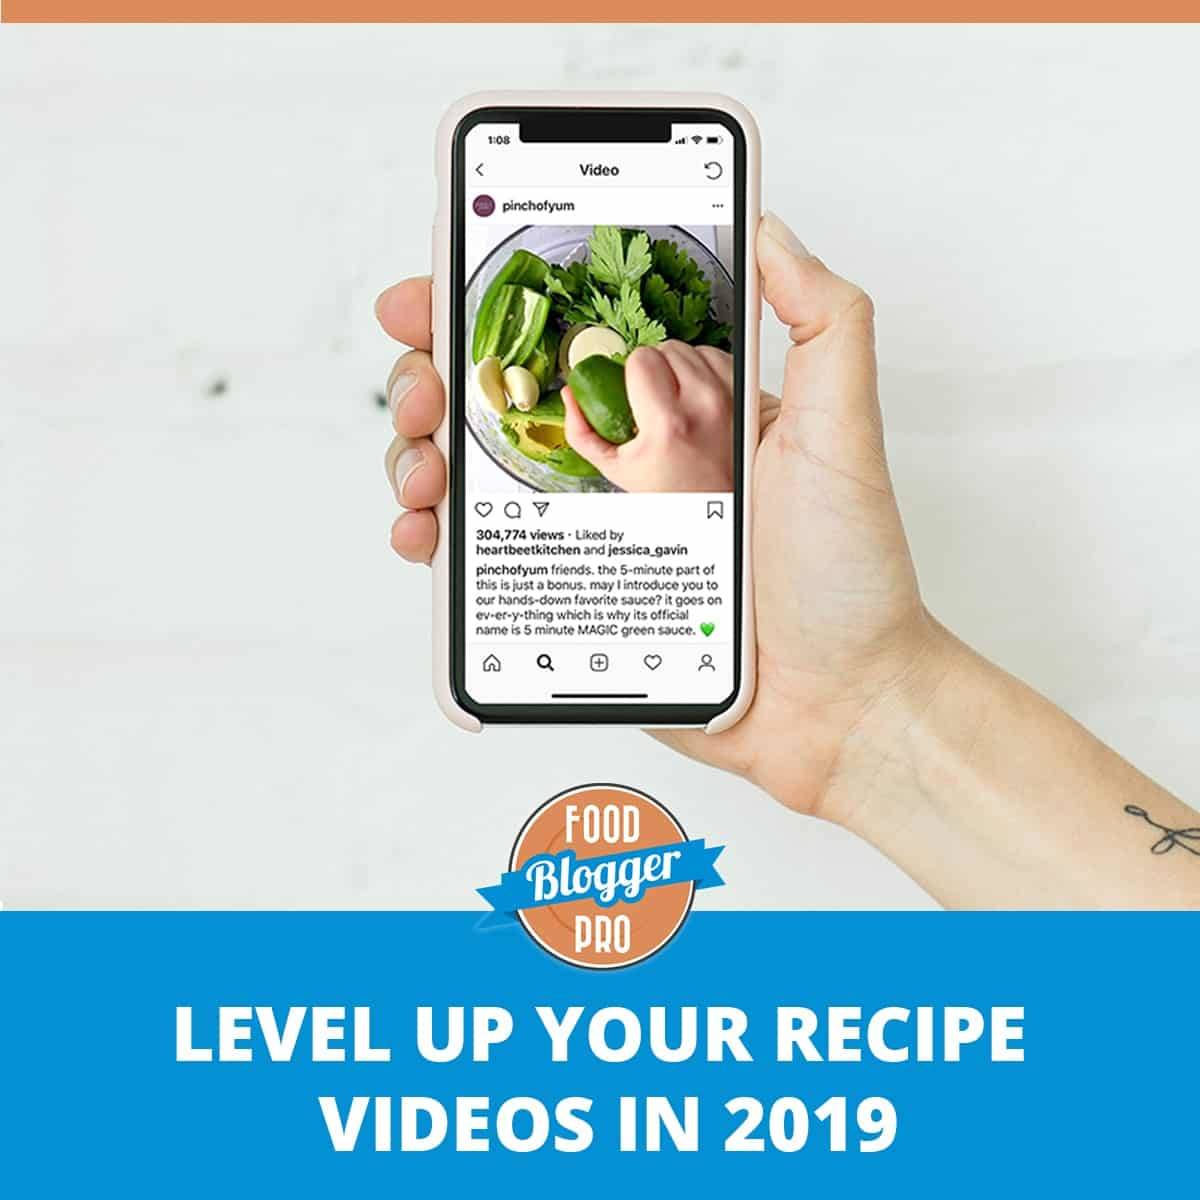 Hand holding iPhone with level up your recipe videos in 2019 graphic.